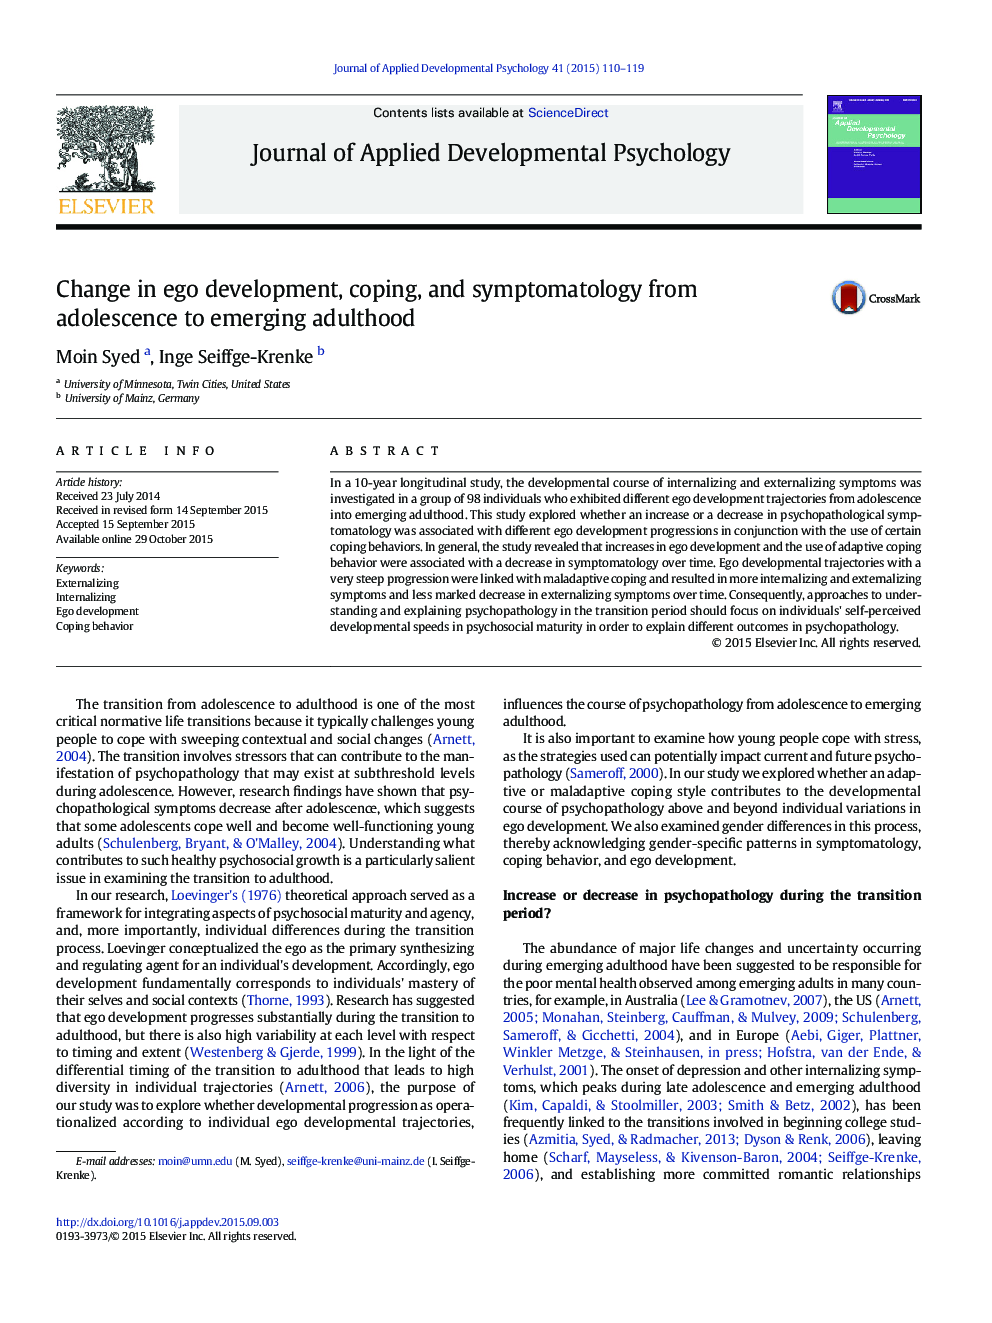 Change in ego development, coping, and symptomatology from adolescence to emerging adulthood